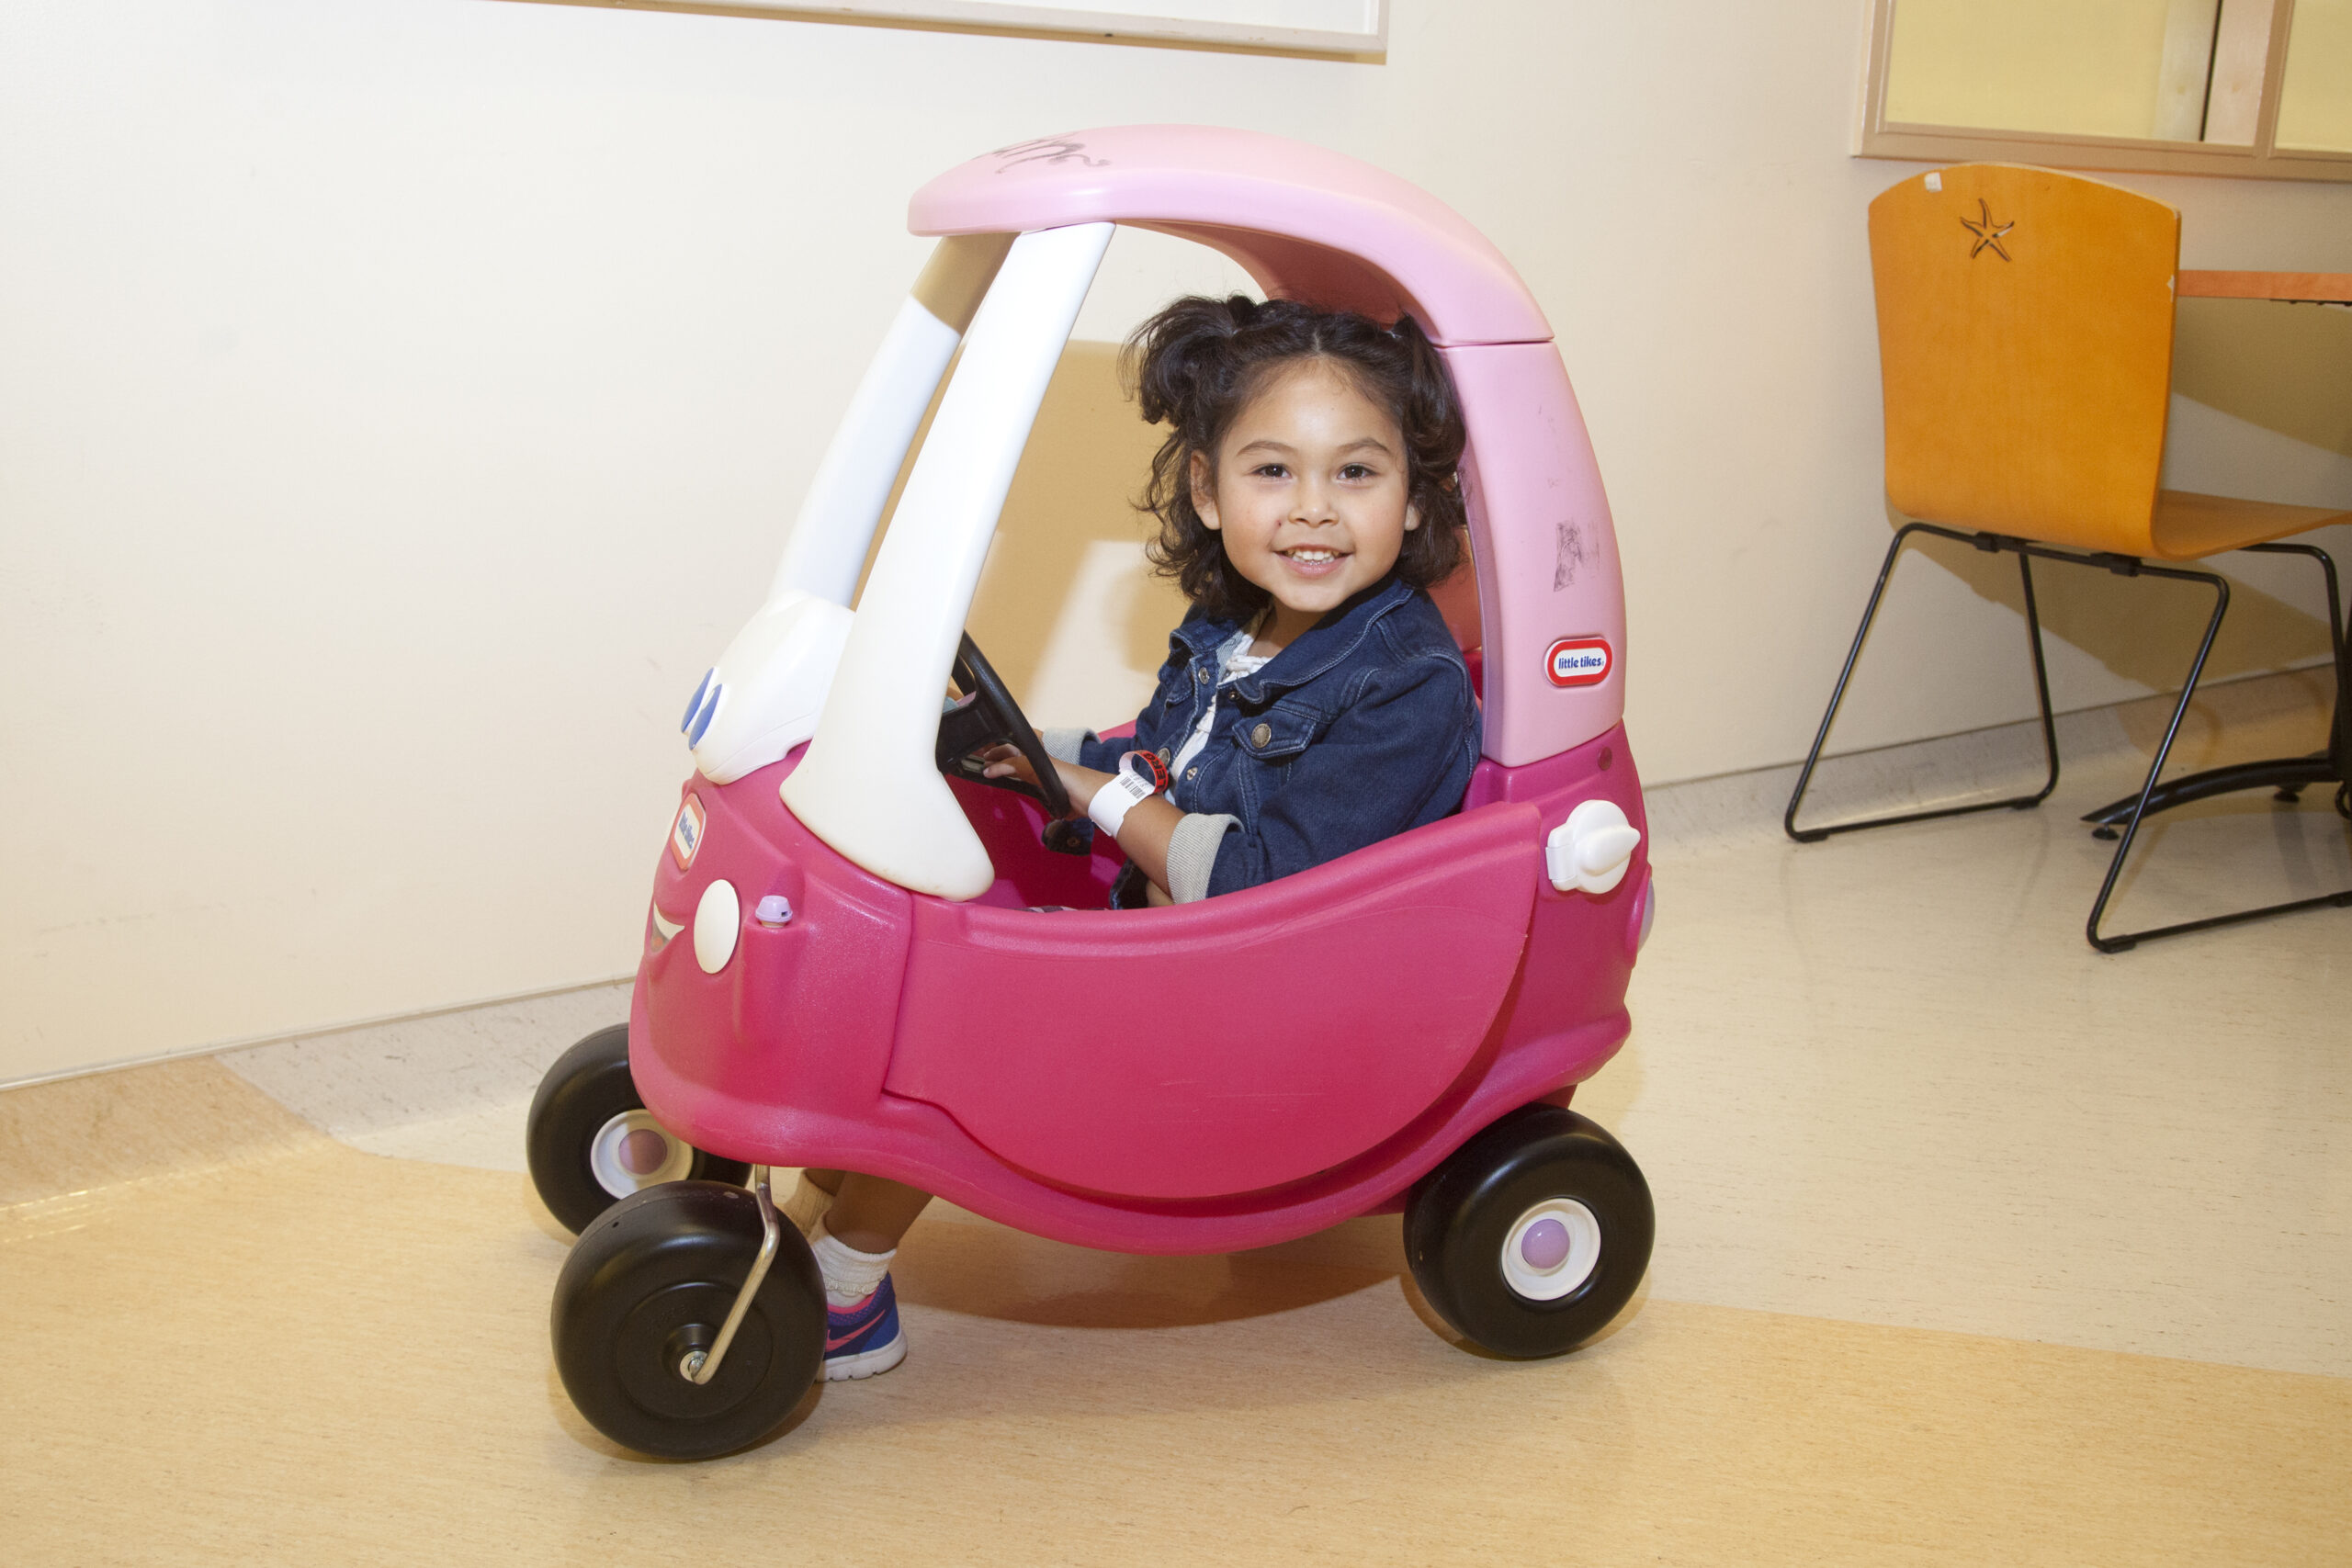 Young leukemia patient sitting in a toy car